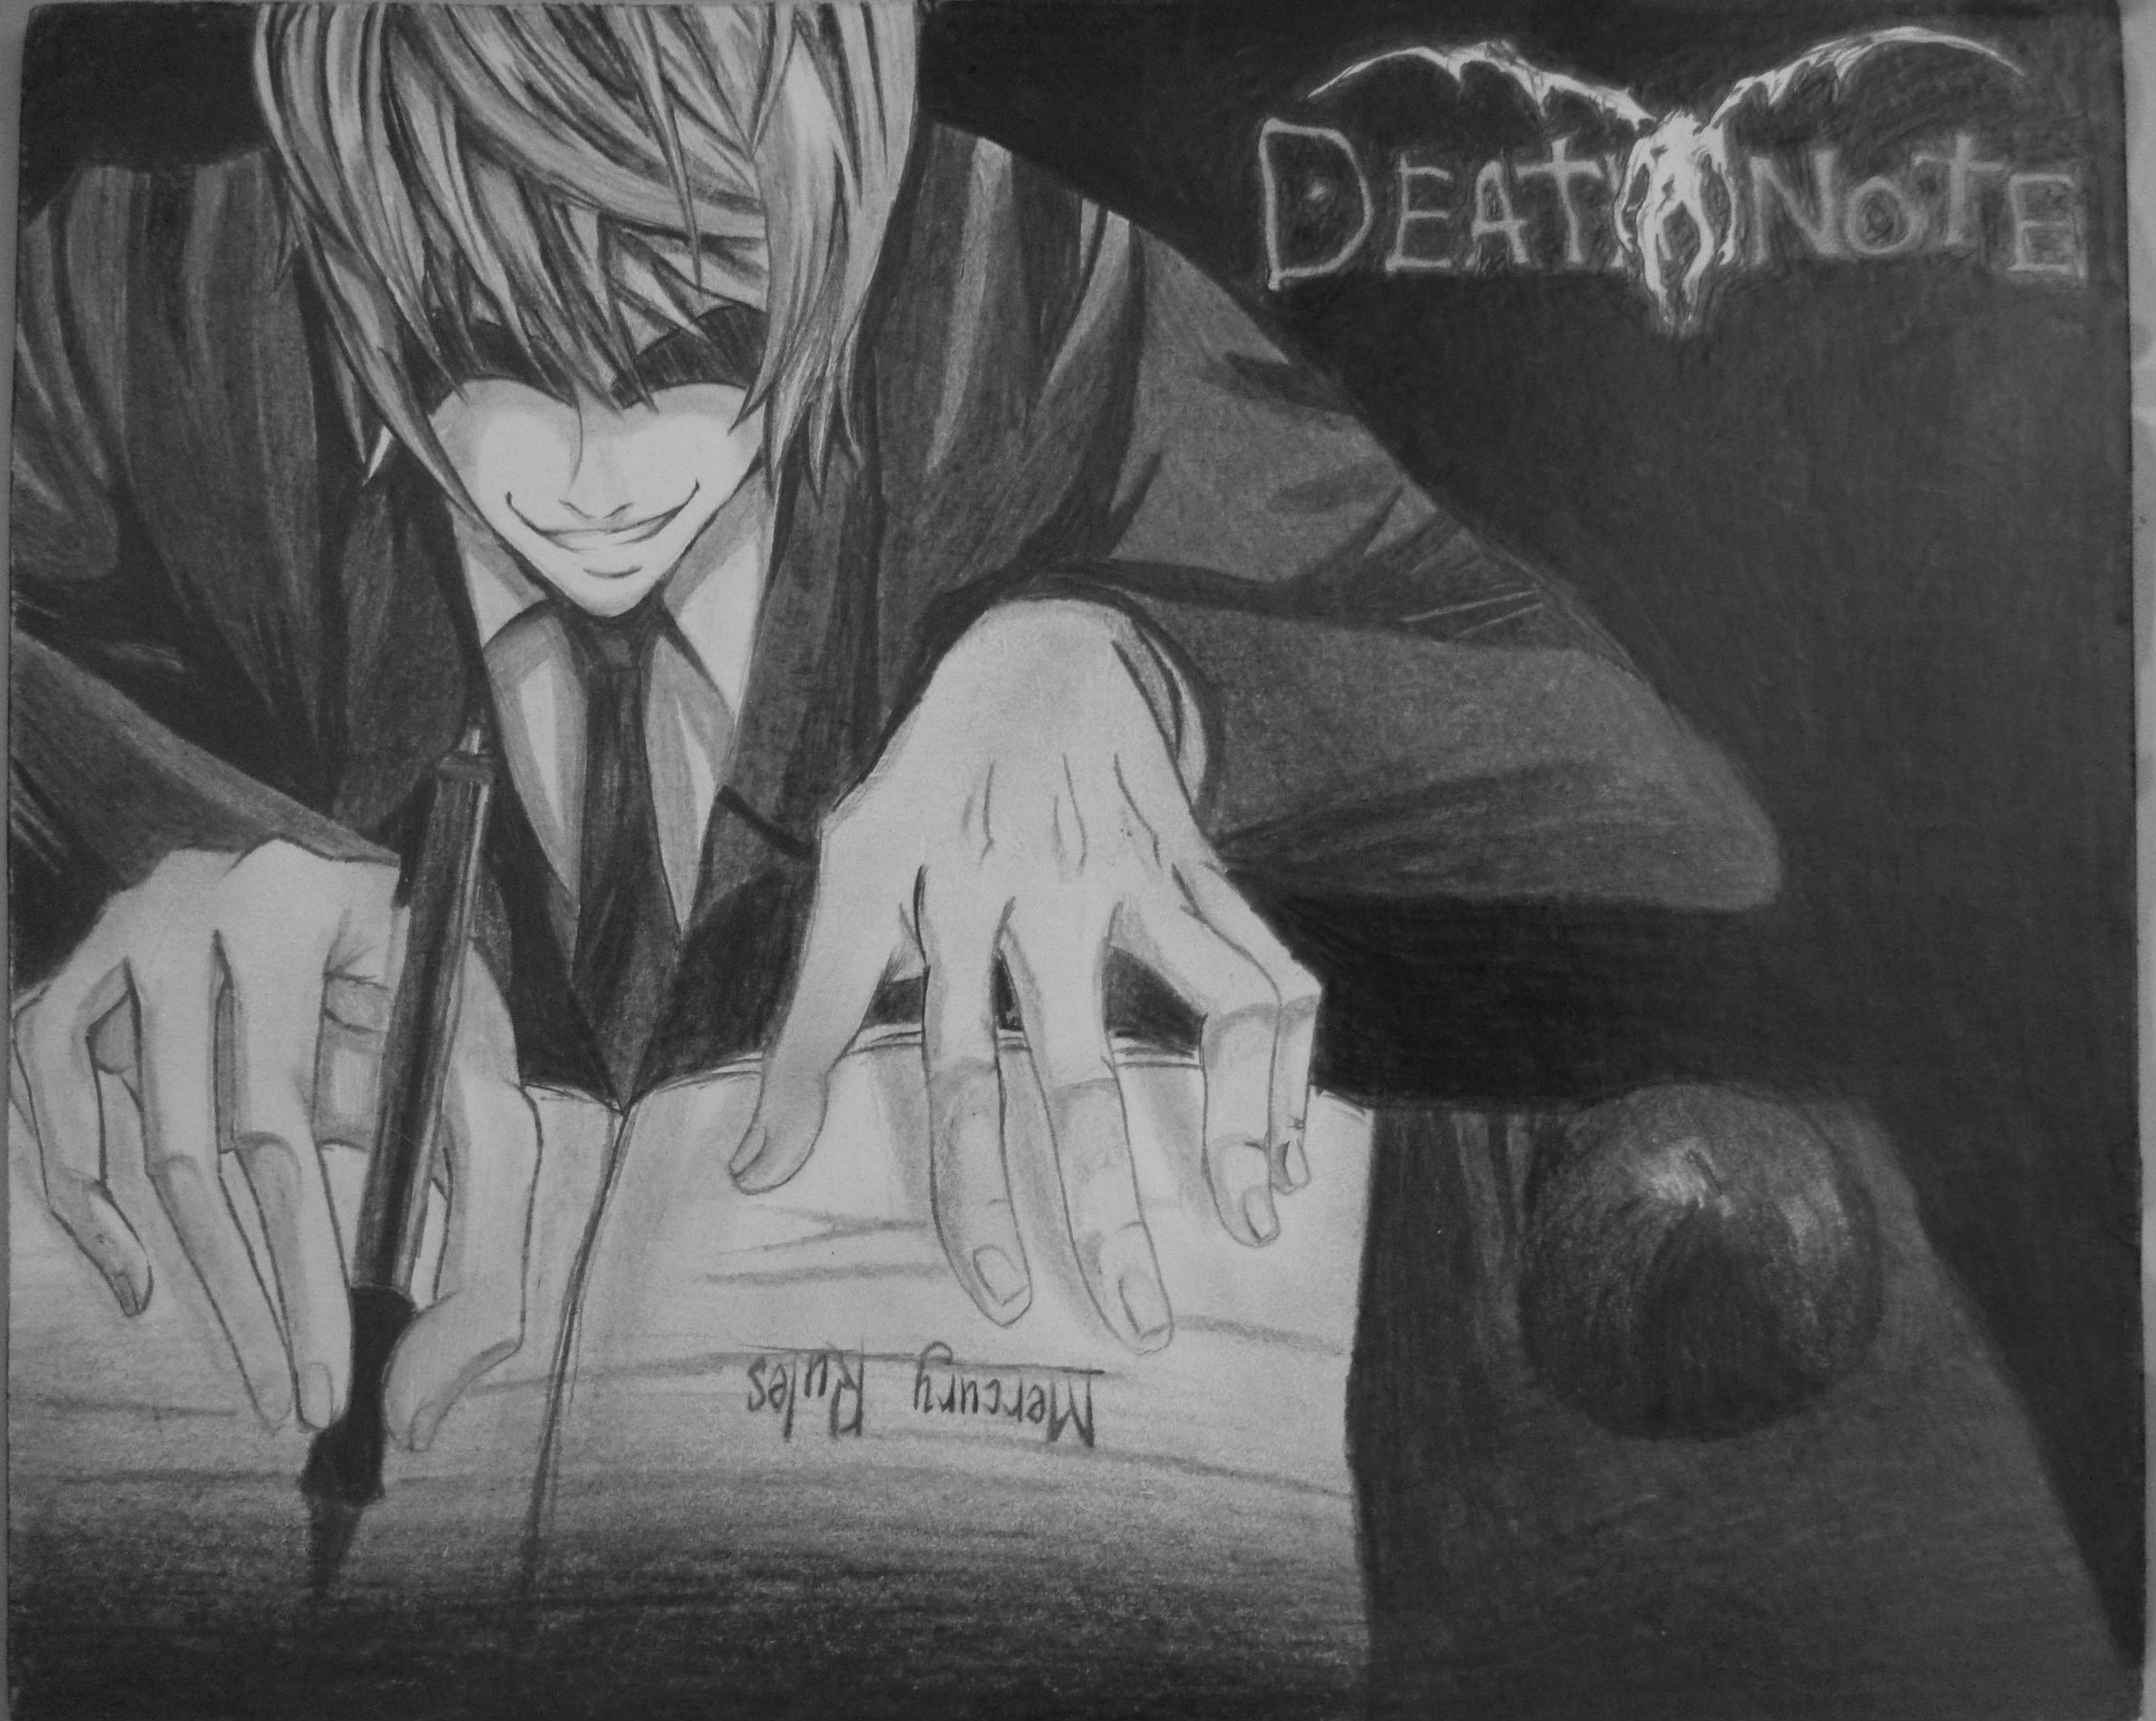 drawing of Light from death note by Jelleebear on DeviantArt